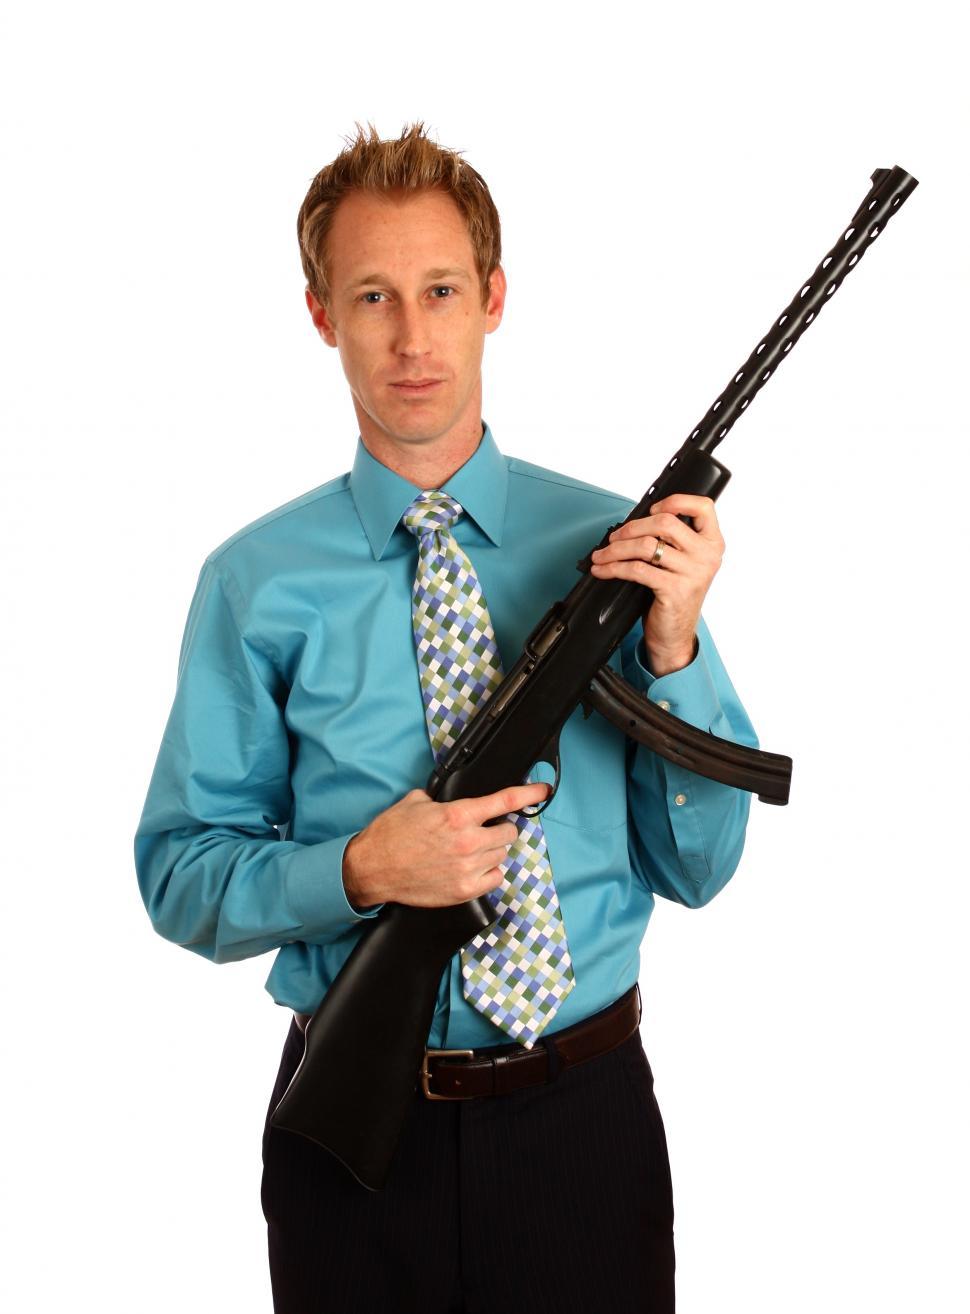 Free Image of A young businessman holding a rifle 